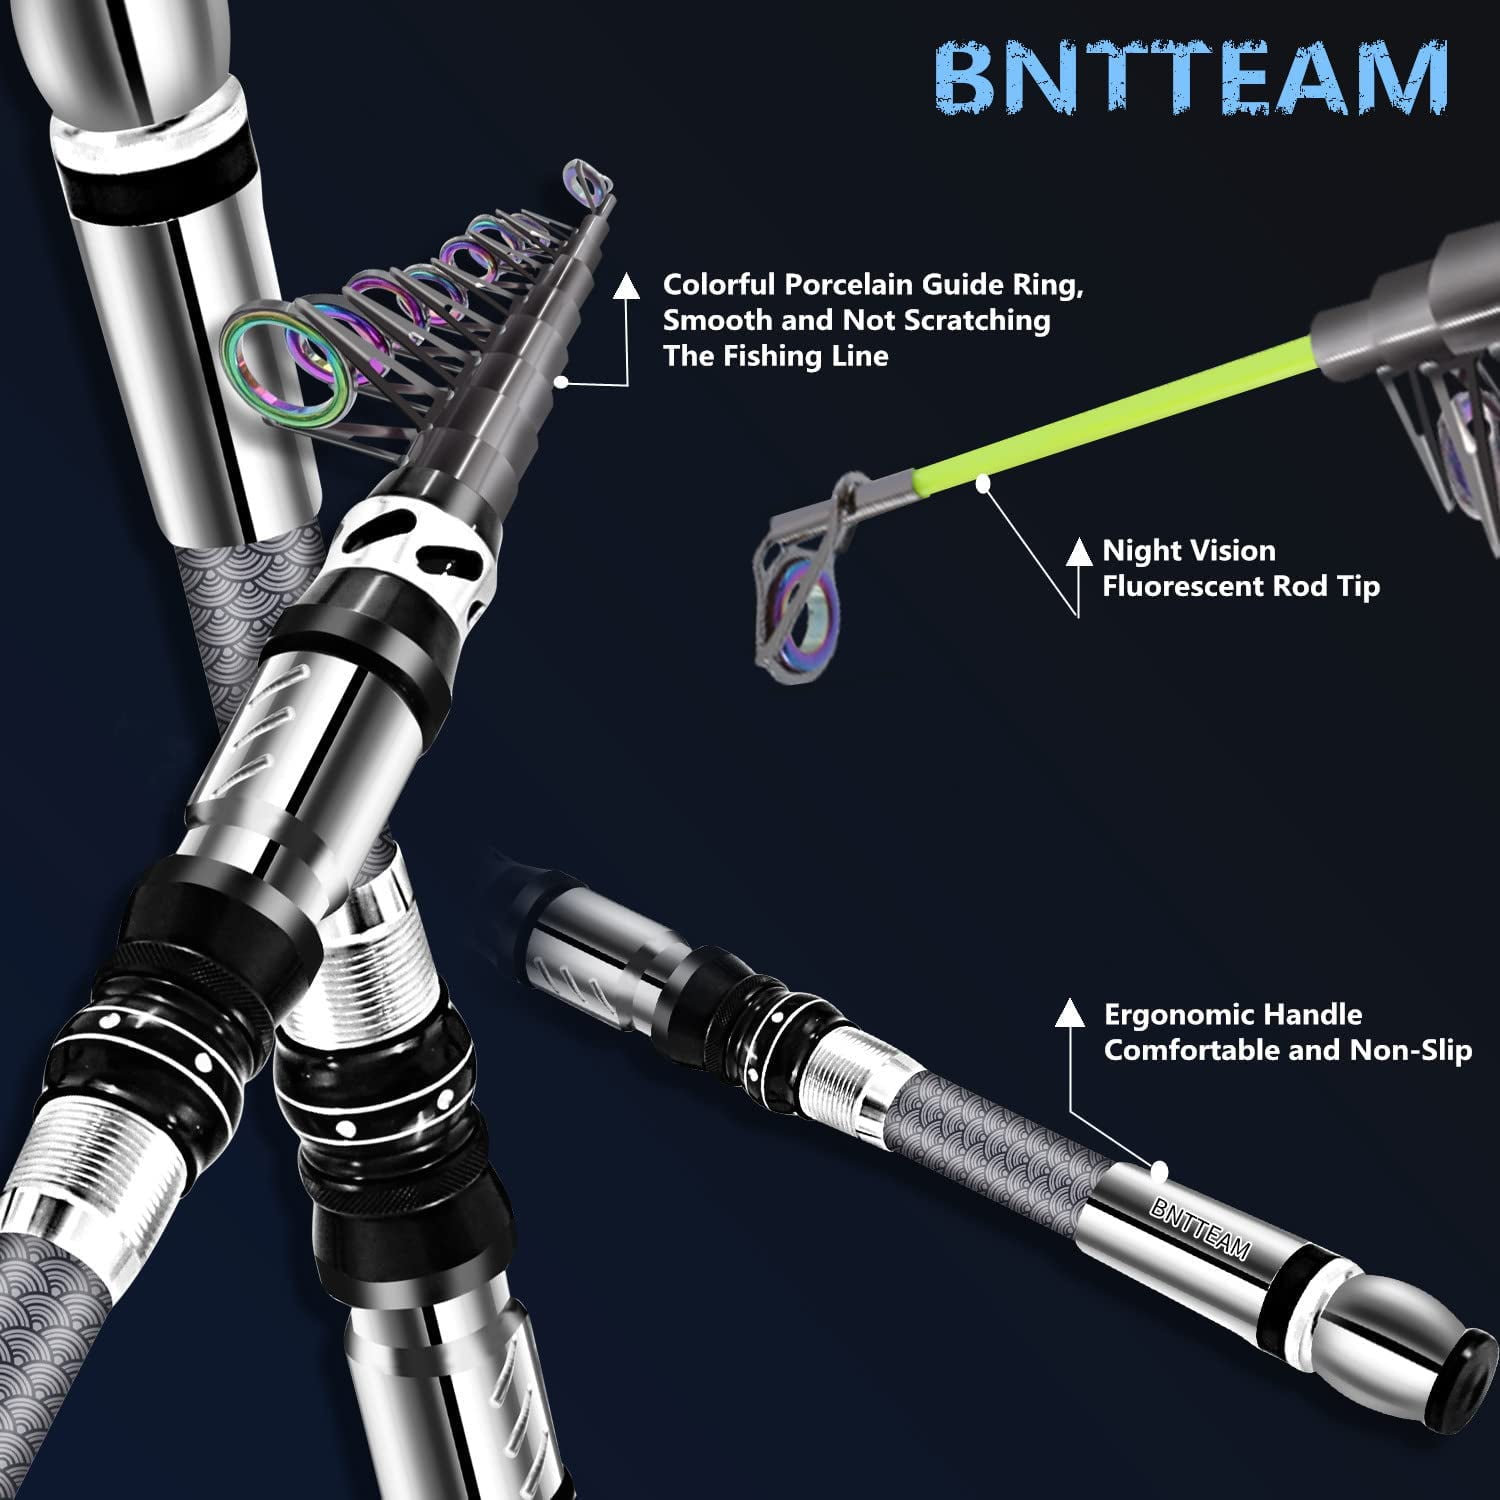 BNTTEAM Portable Fishing Spinning Rod and Reel Combo set